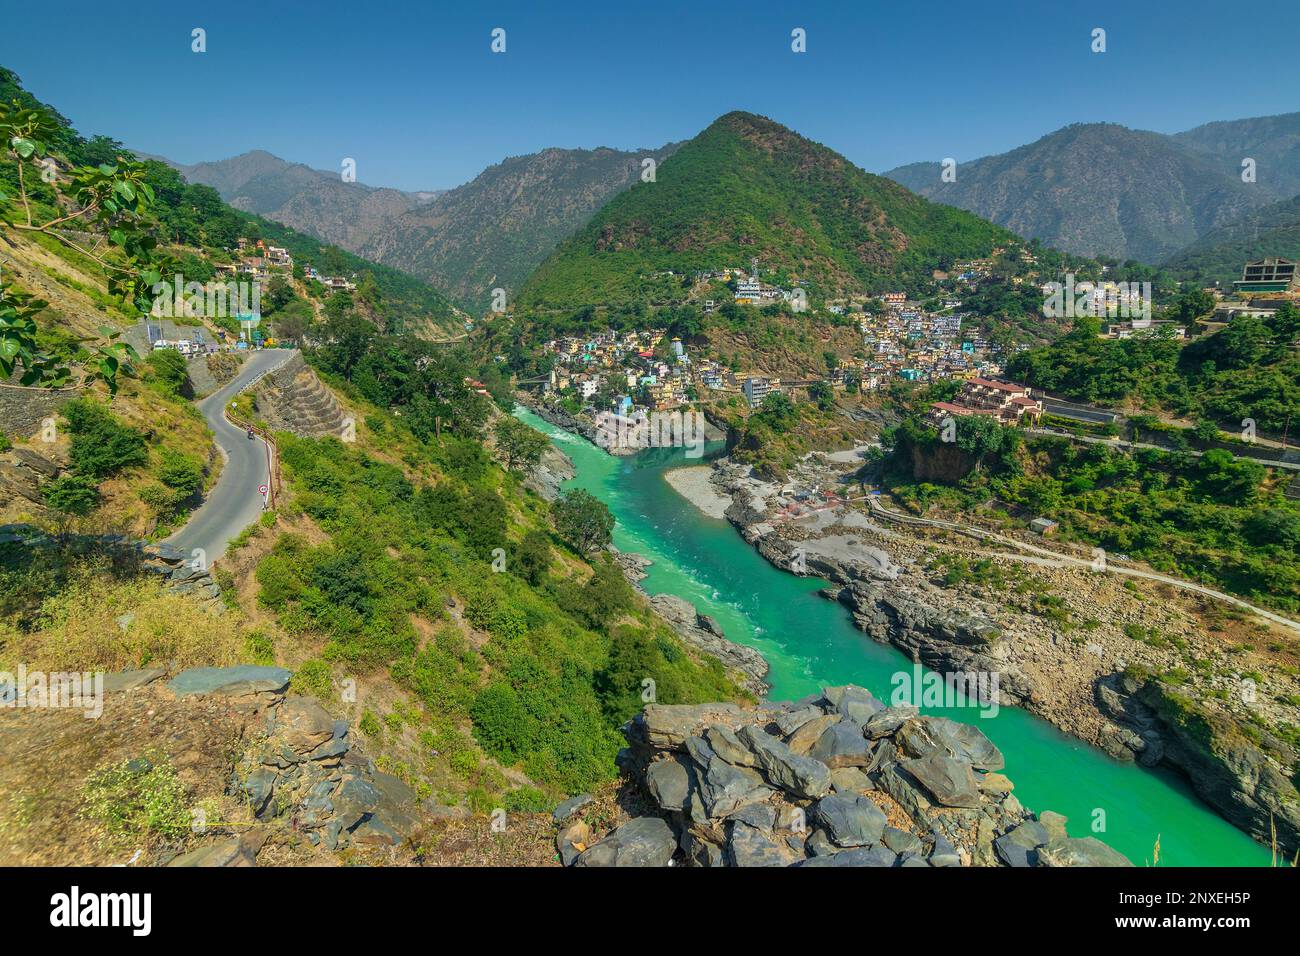 Curvy road at Devprayag, Godly Confluence,Garhwal,Uttarakhand, India. Here Alaknanda meets the Bhagirathi river and forms Ganges river. India. Stock Photo